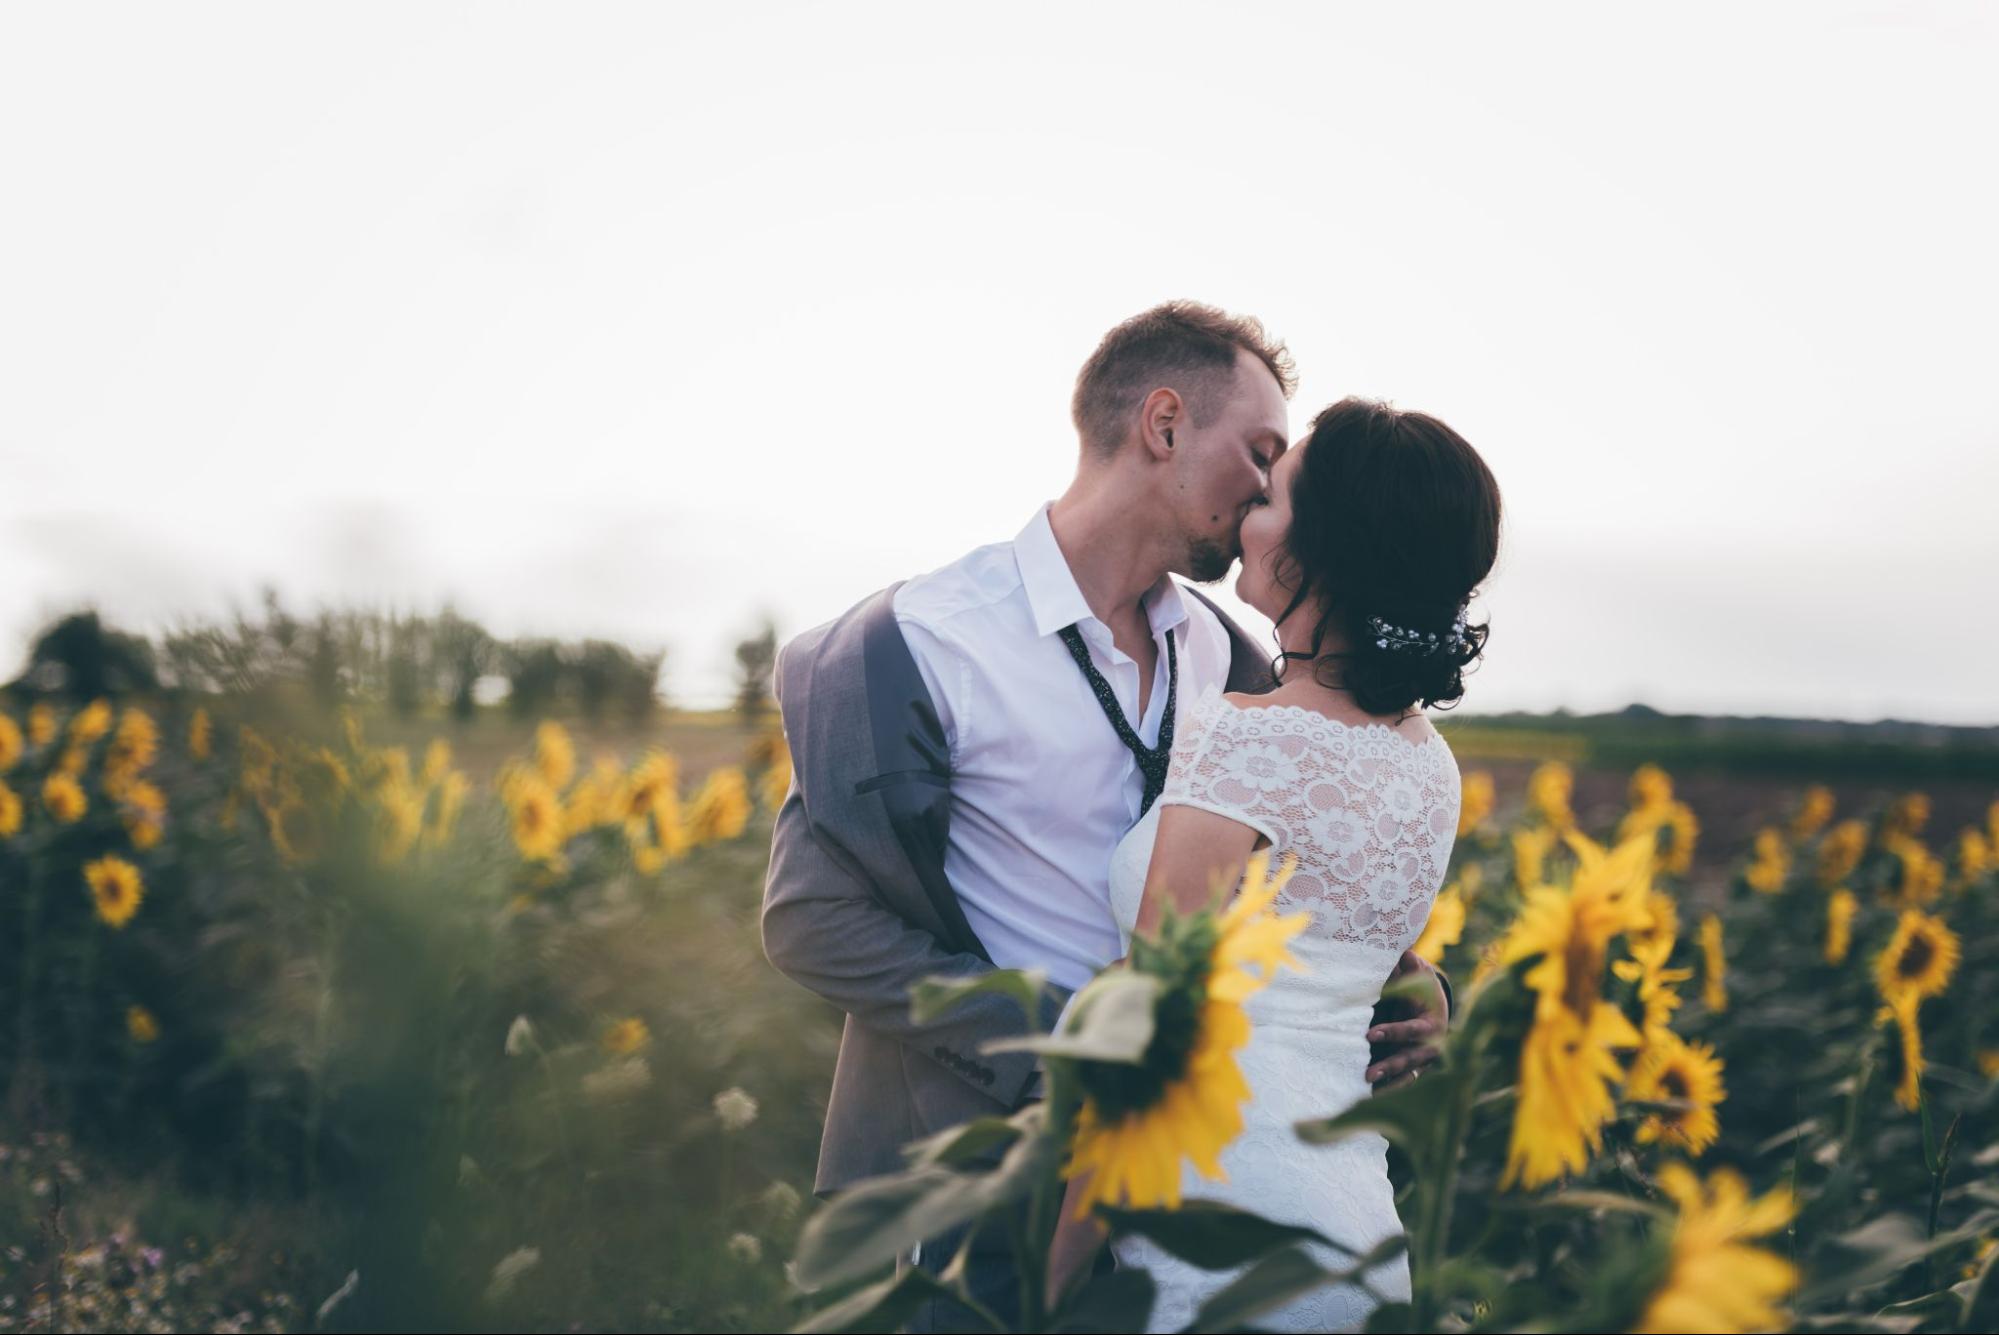 A bride and groom kisses in a sunflower field.